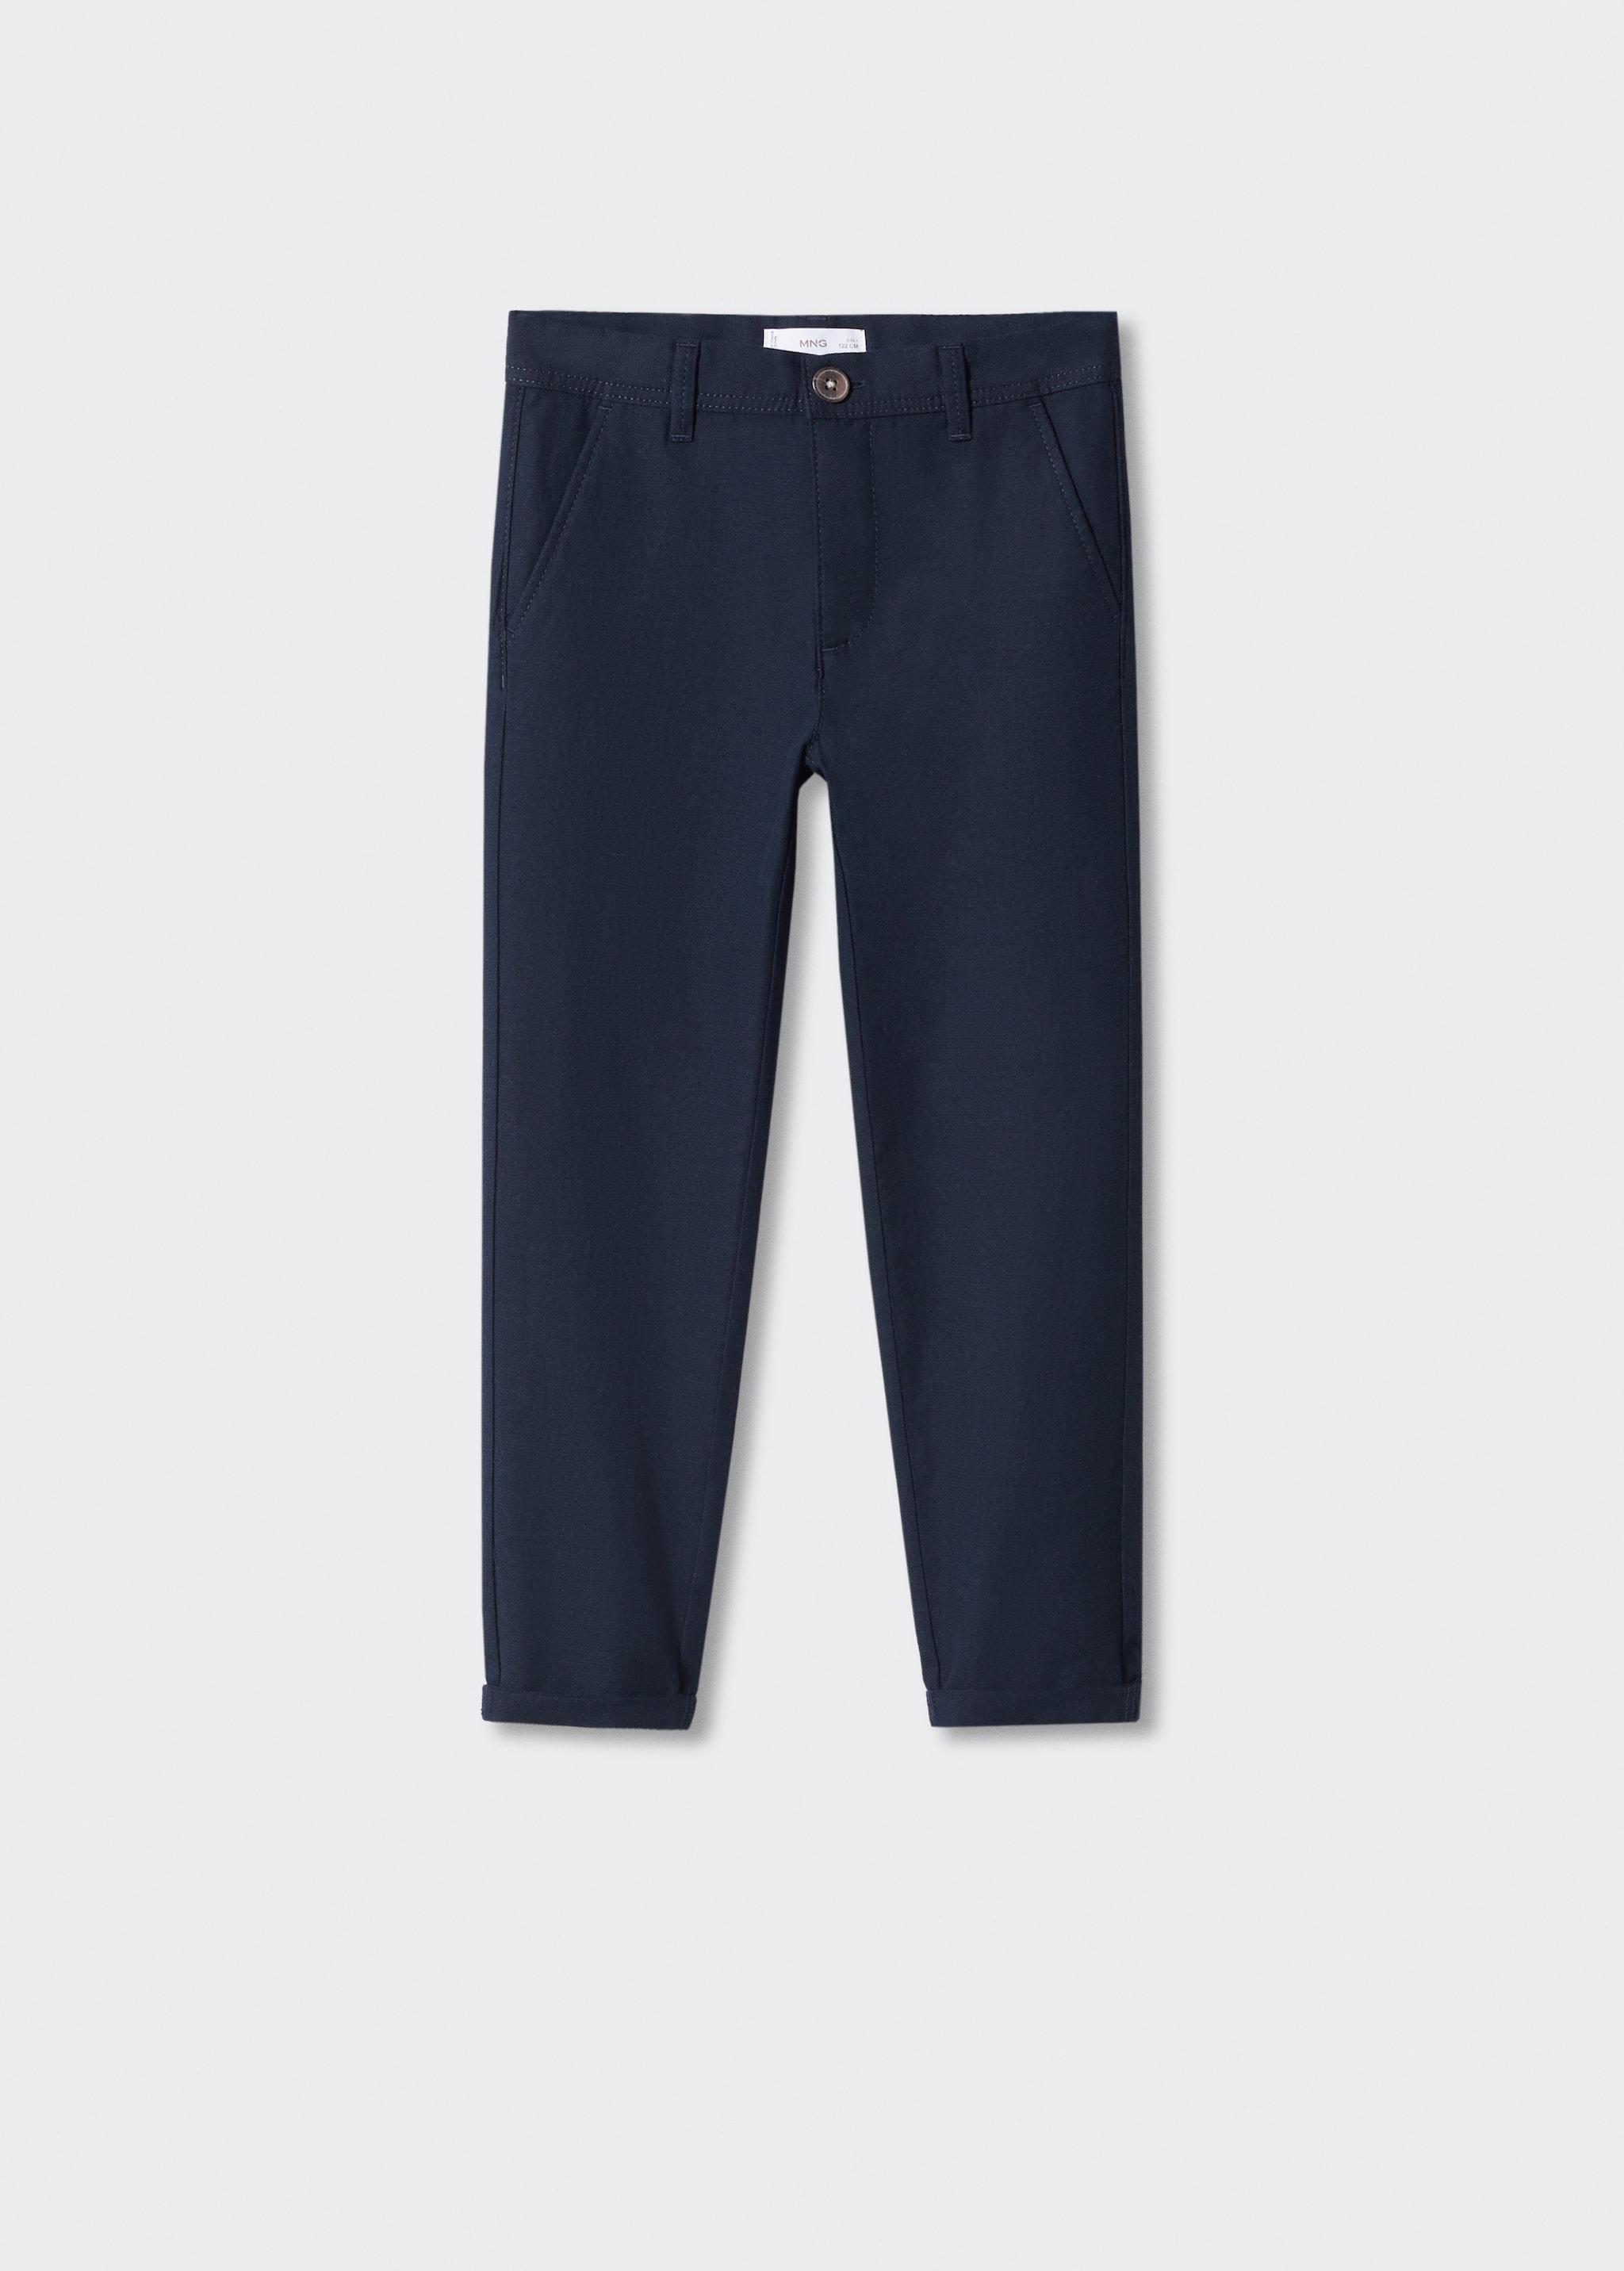 Linen chino trousers - Article without model